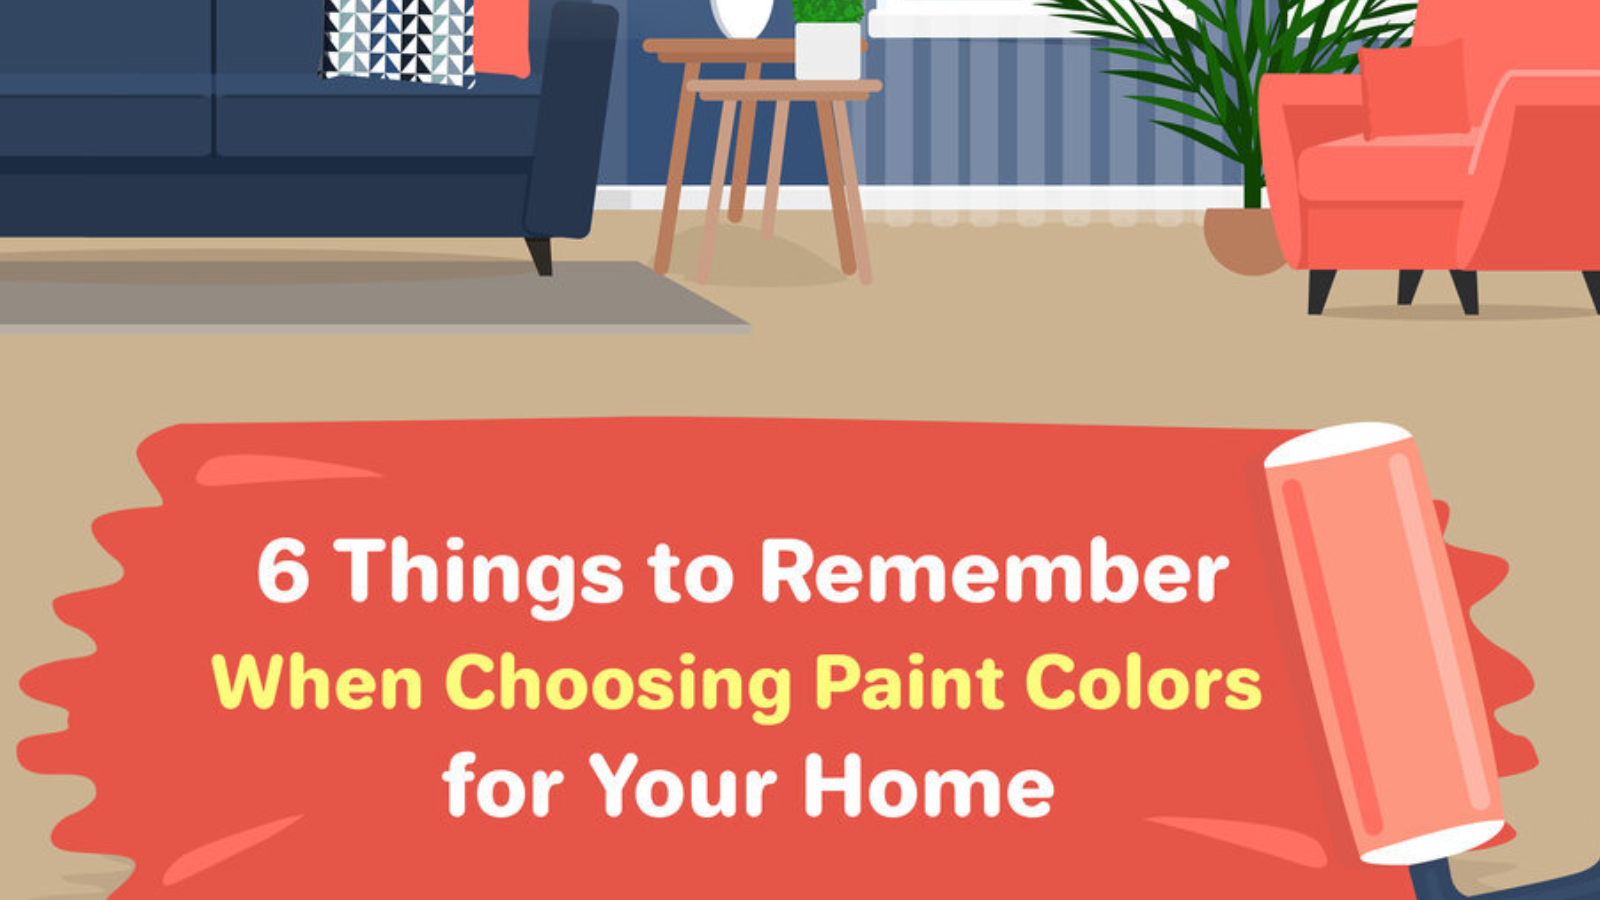 6 Things to Remember When Choosing Paint Colors for Your Home